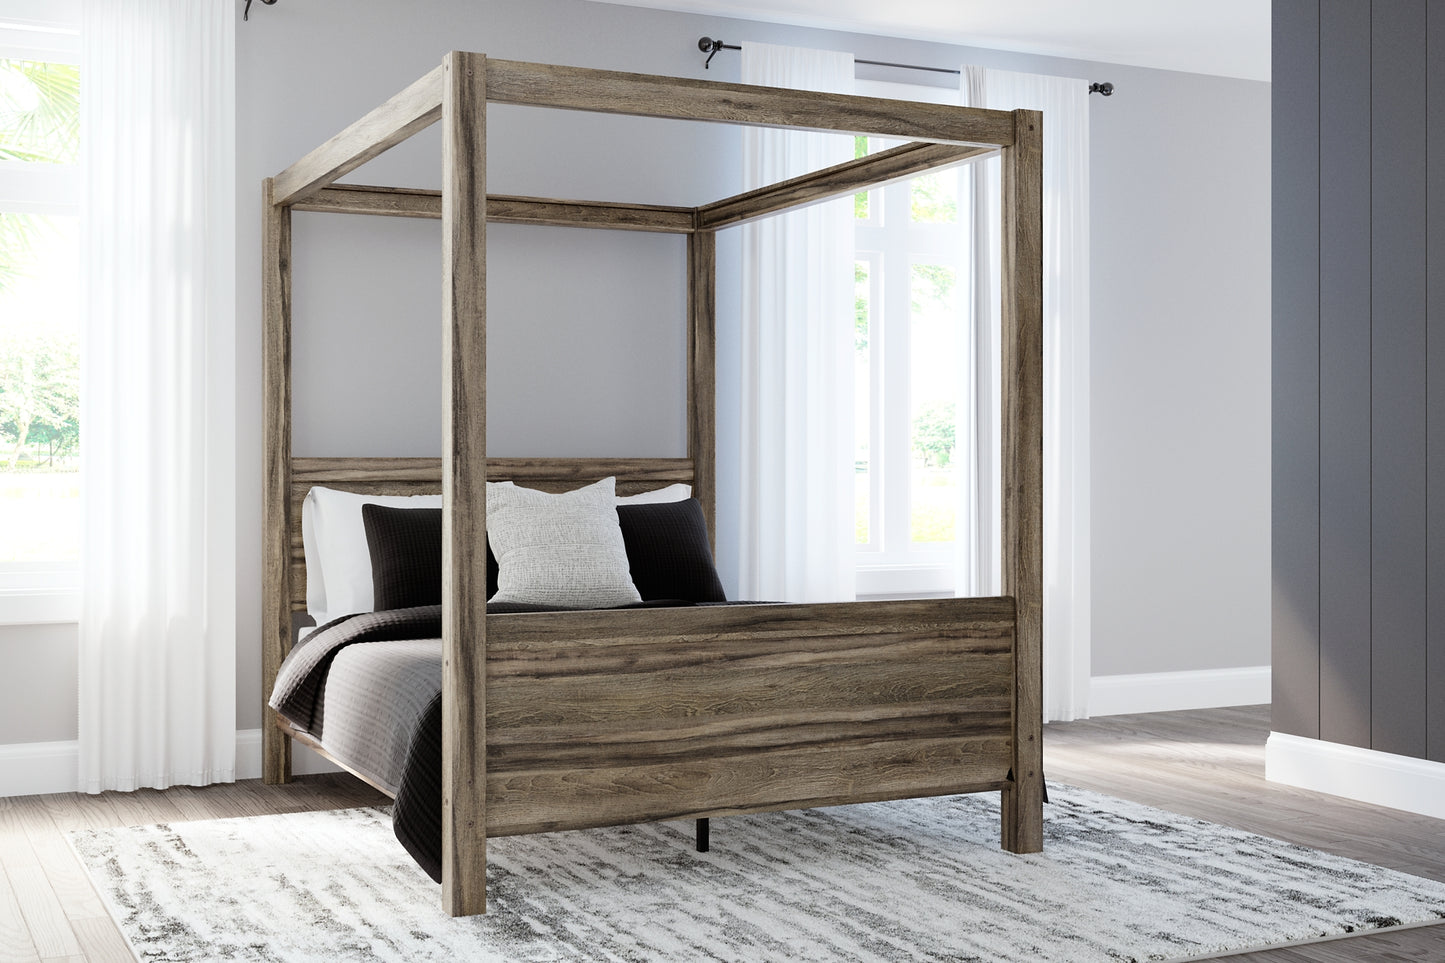 Shallifer Queen Canopy Bed with Dresser, Chest and Nightstand